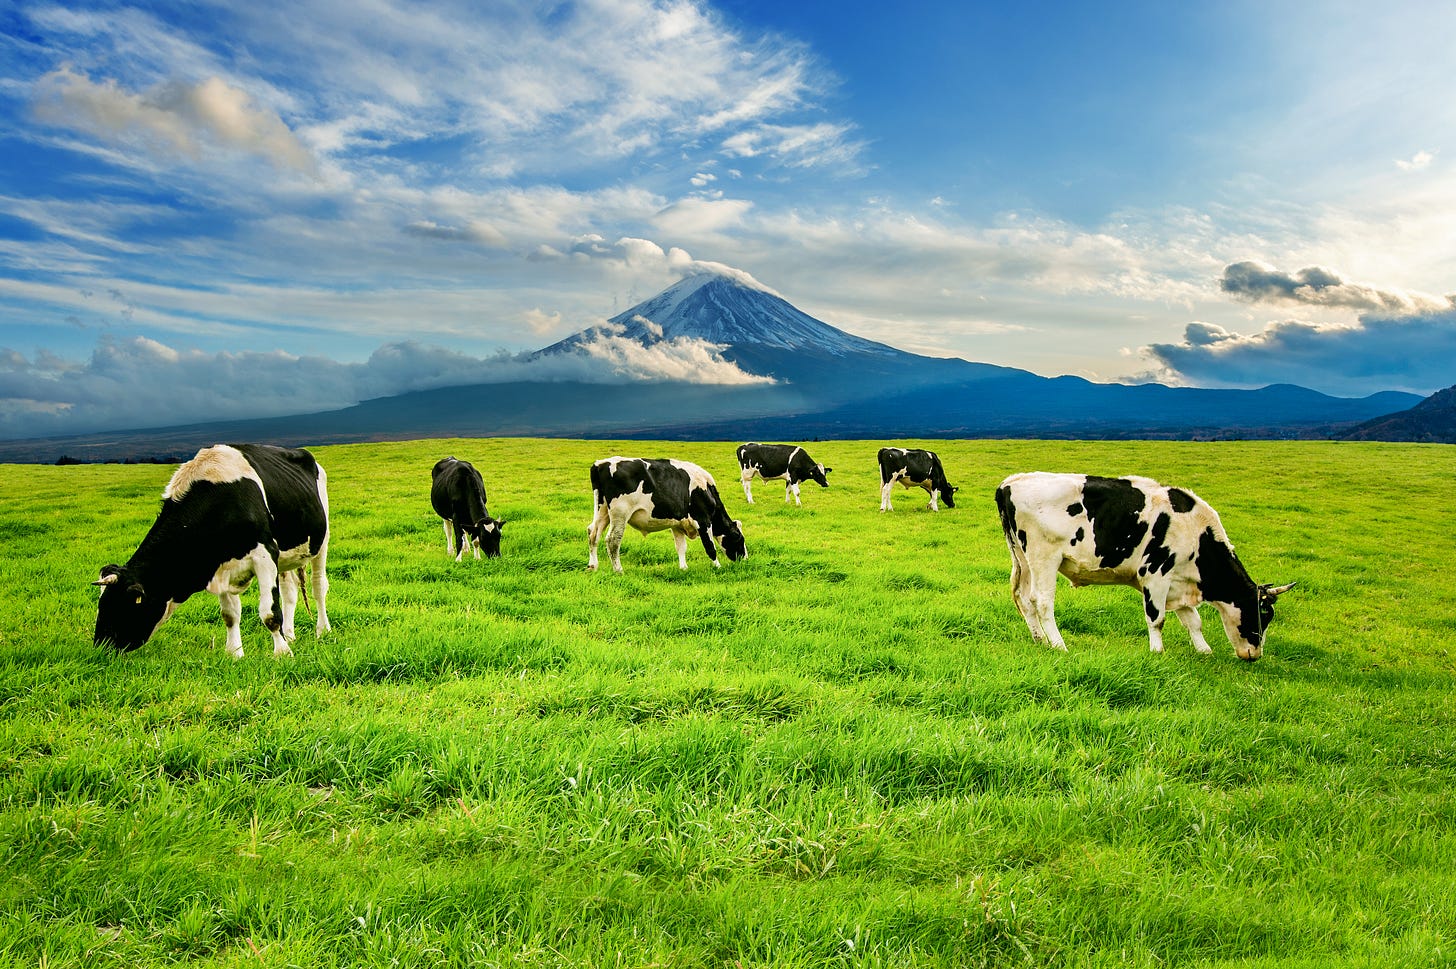 https://www.freepik.com/free-photo/cows-eating-lush-grass-green-field-front-fuji-mountain-japan_10695438.htm#fromView=search&page=1&position=4&uuid=ec85108f-4c7a-4583-812f-81c42953983d